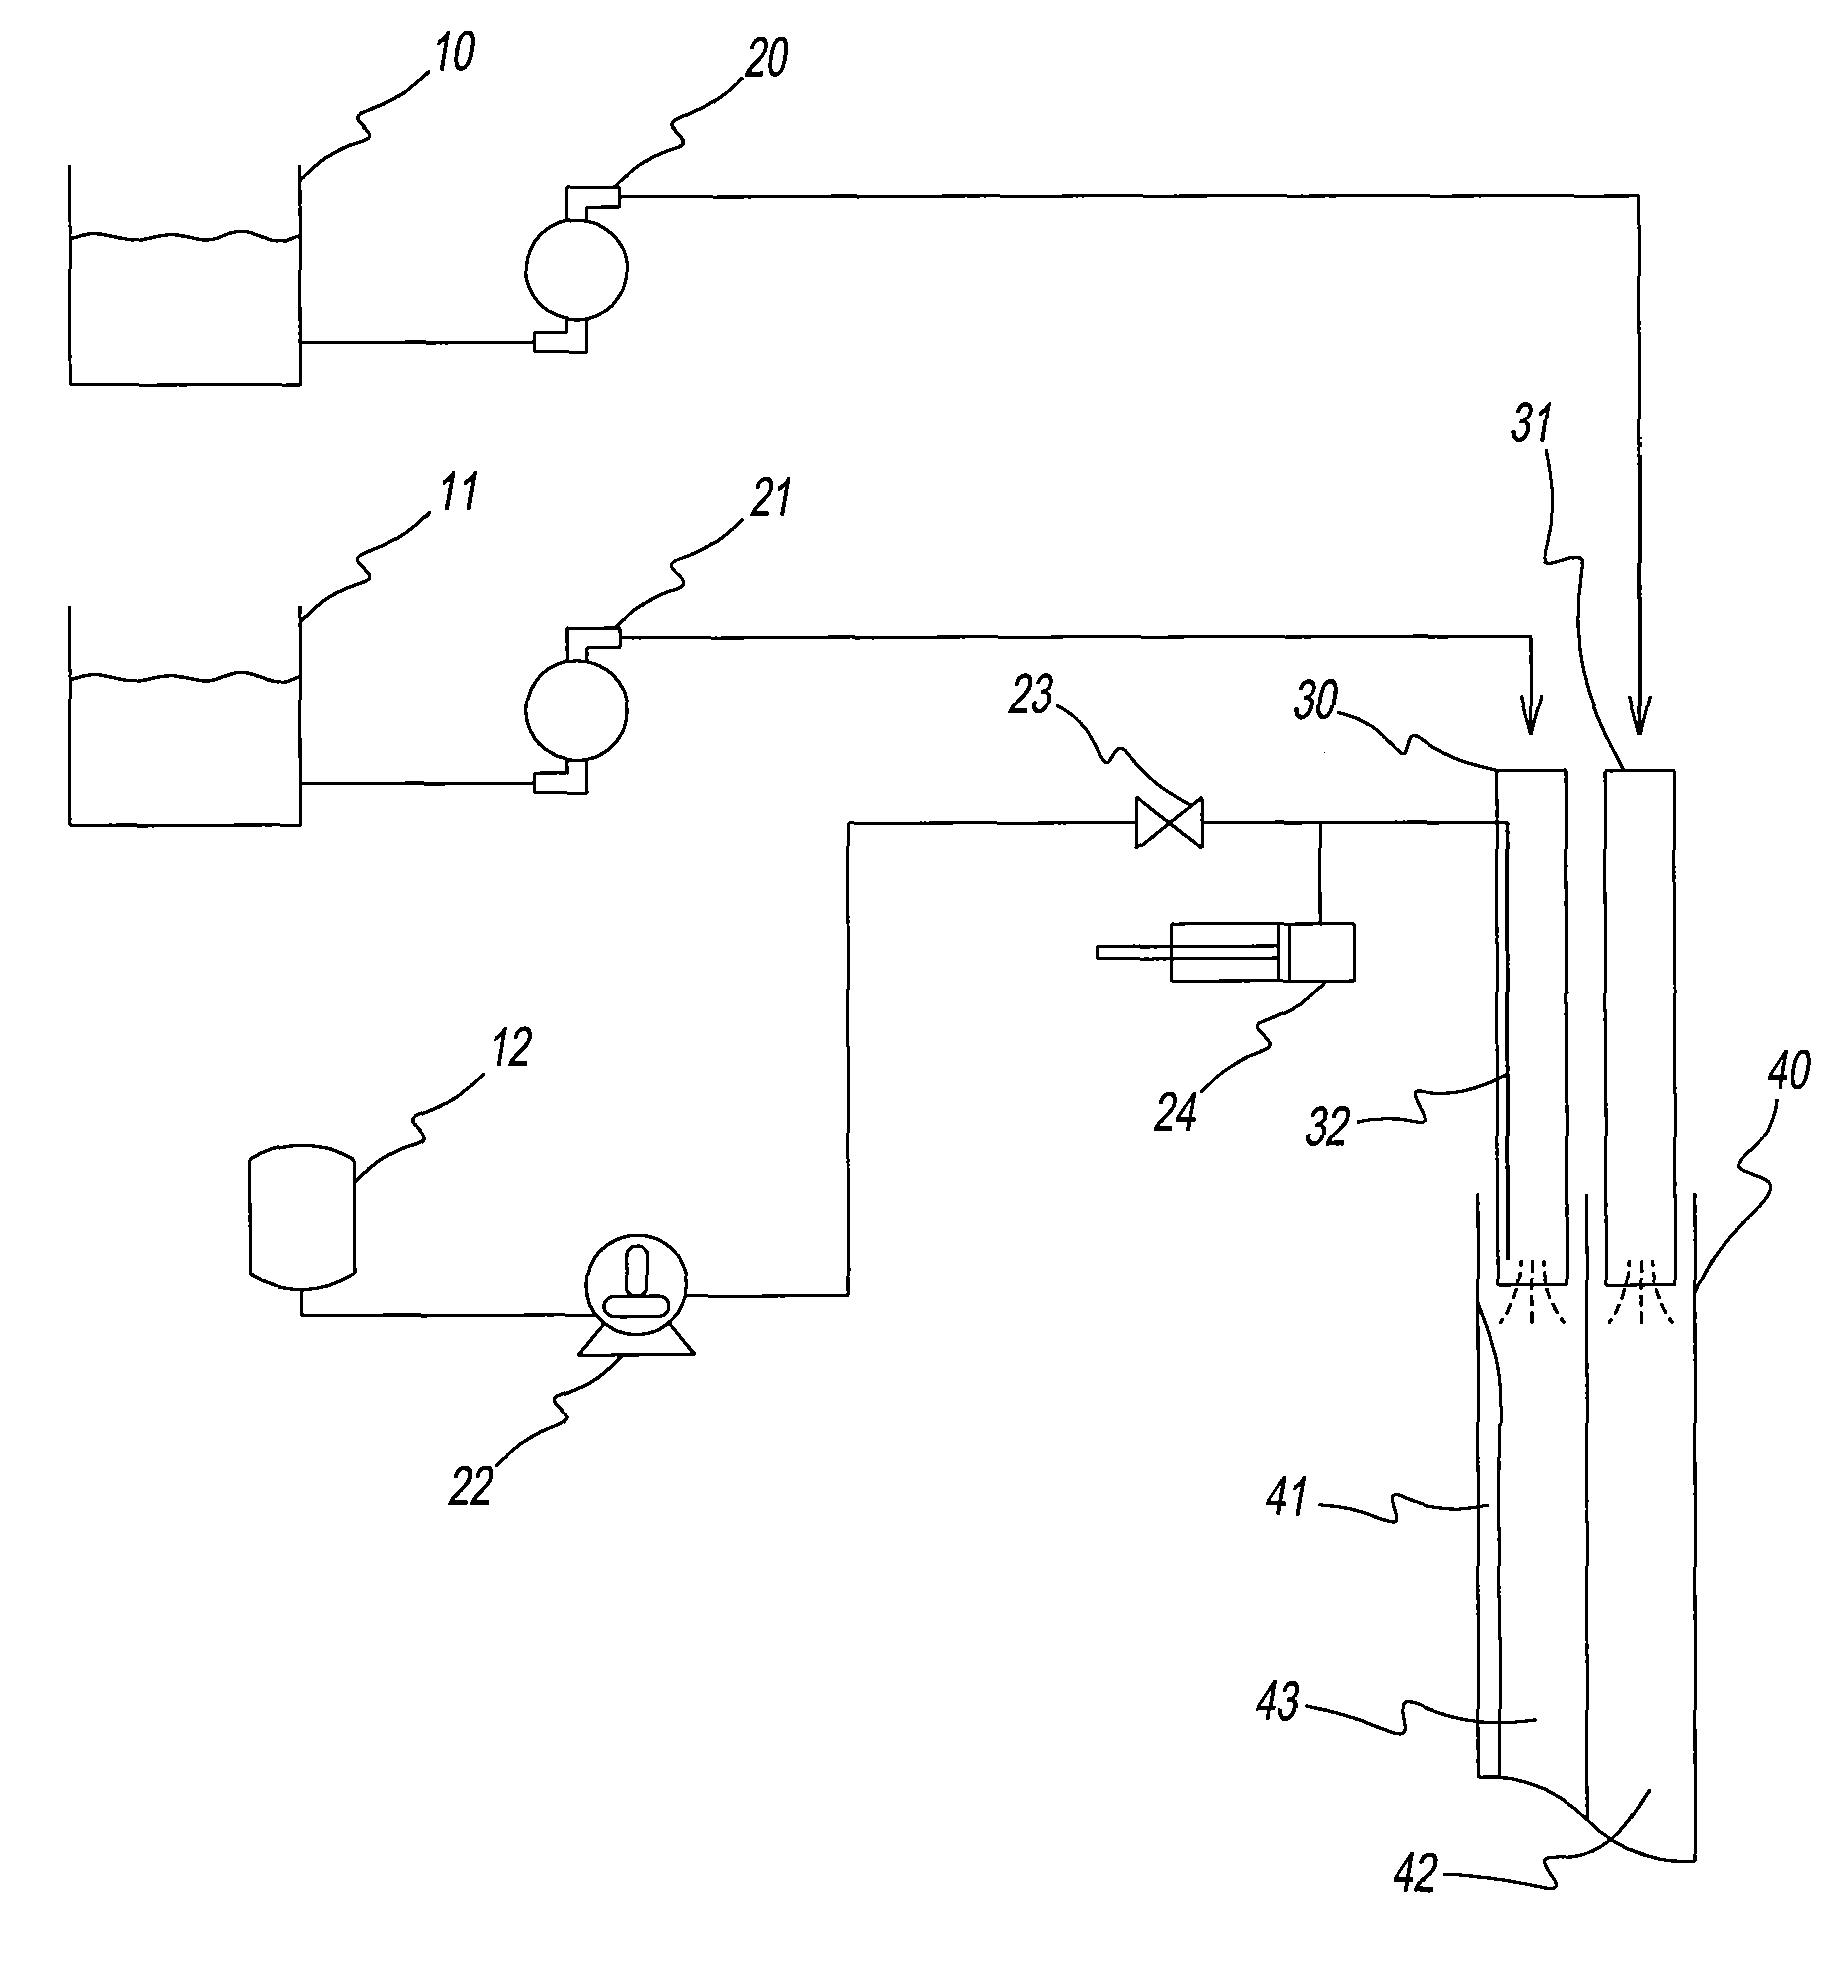 Apparatus and method for anchor bolt grouting